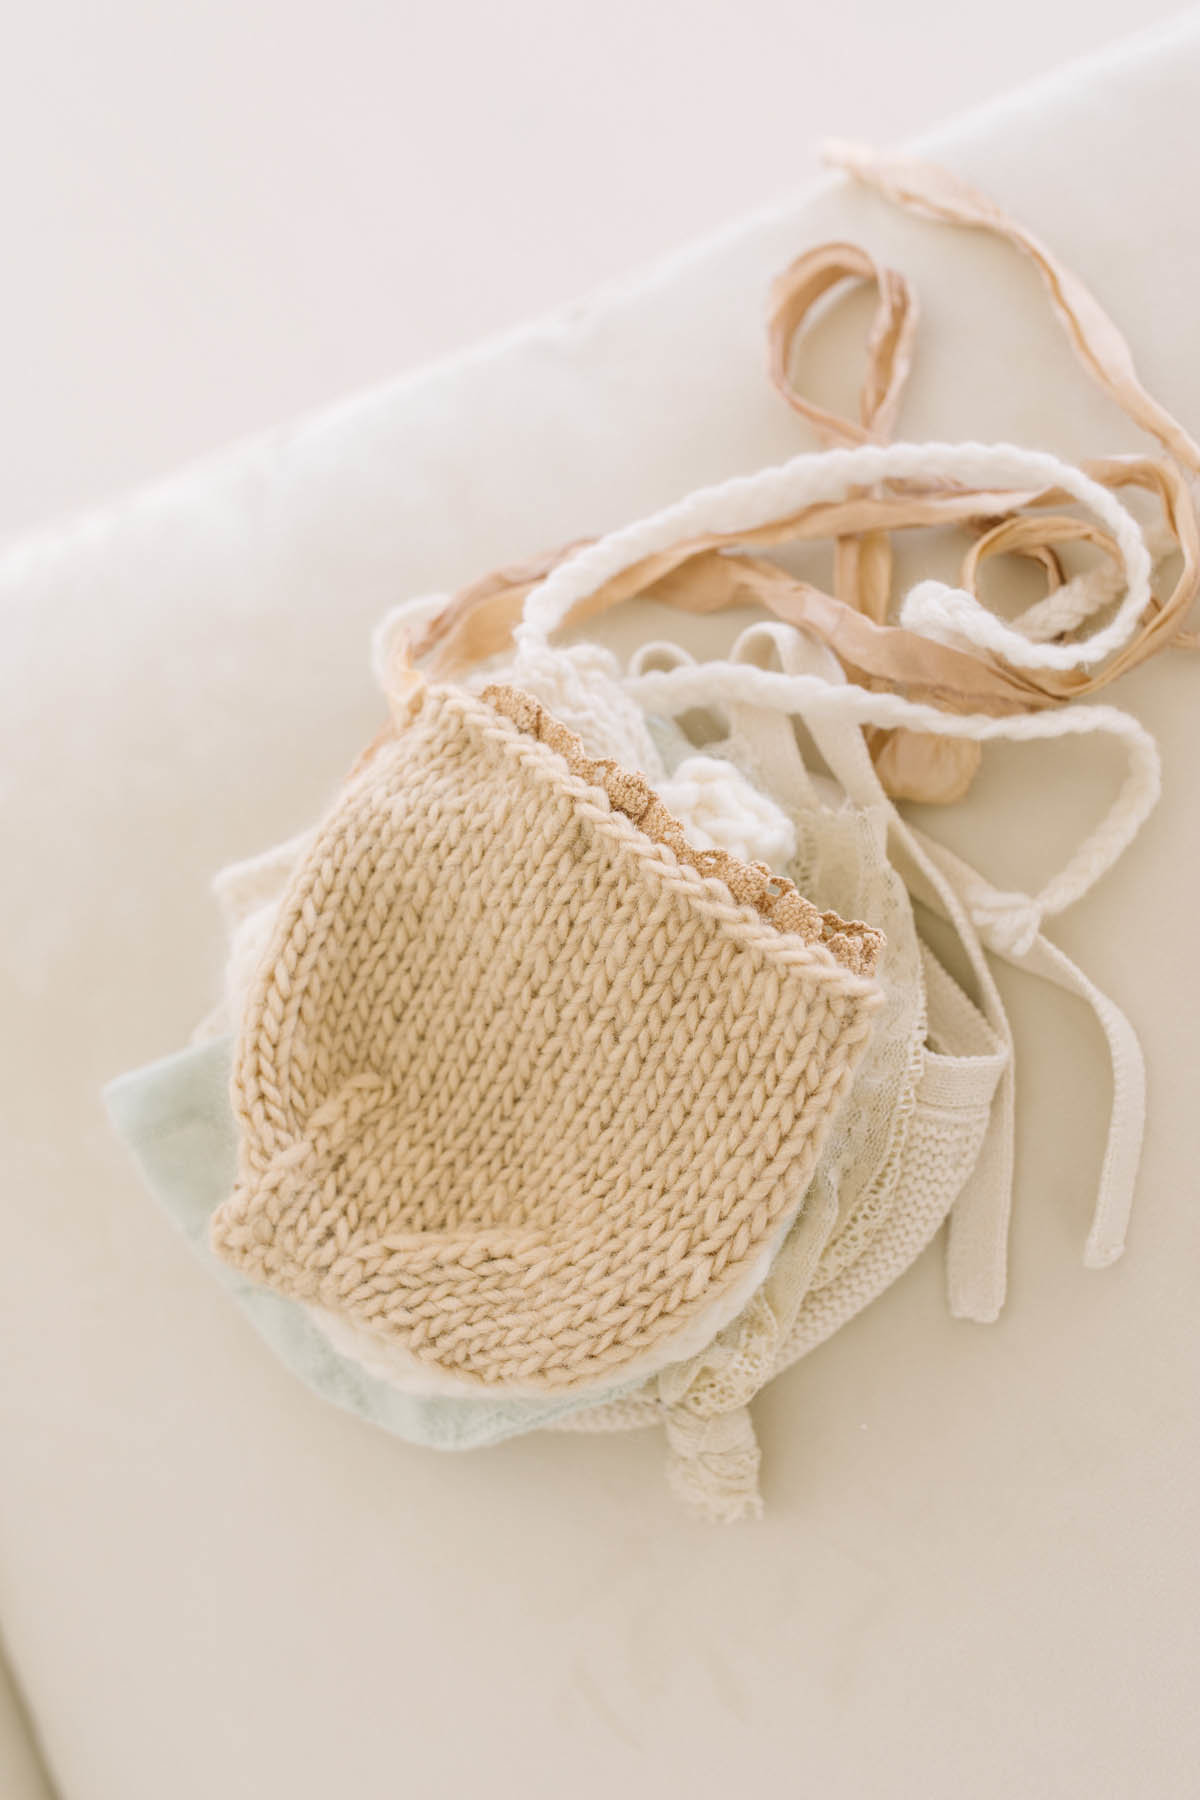 Laurie Baker has a large collection of baby bonnets and hats for her newborn sessions